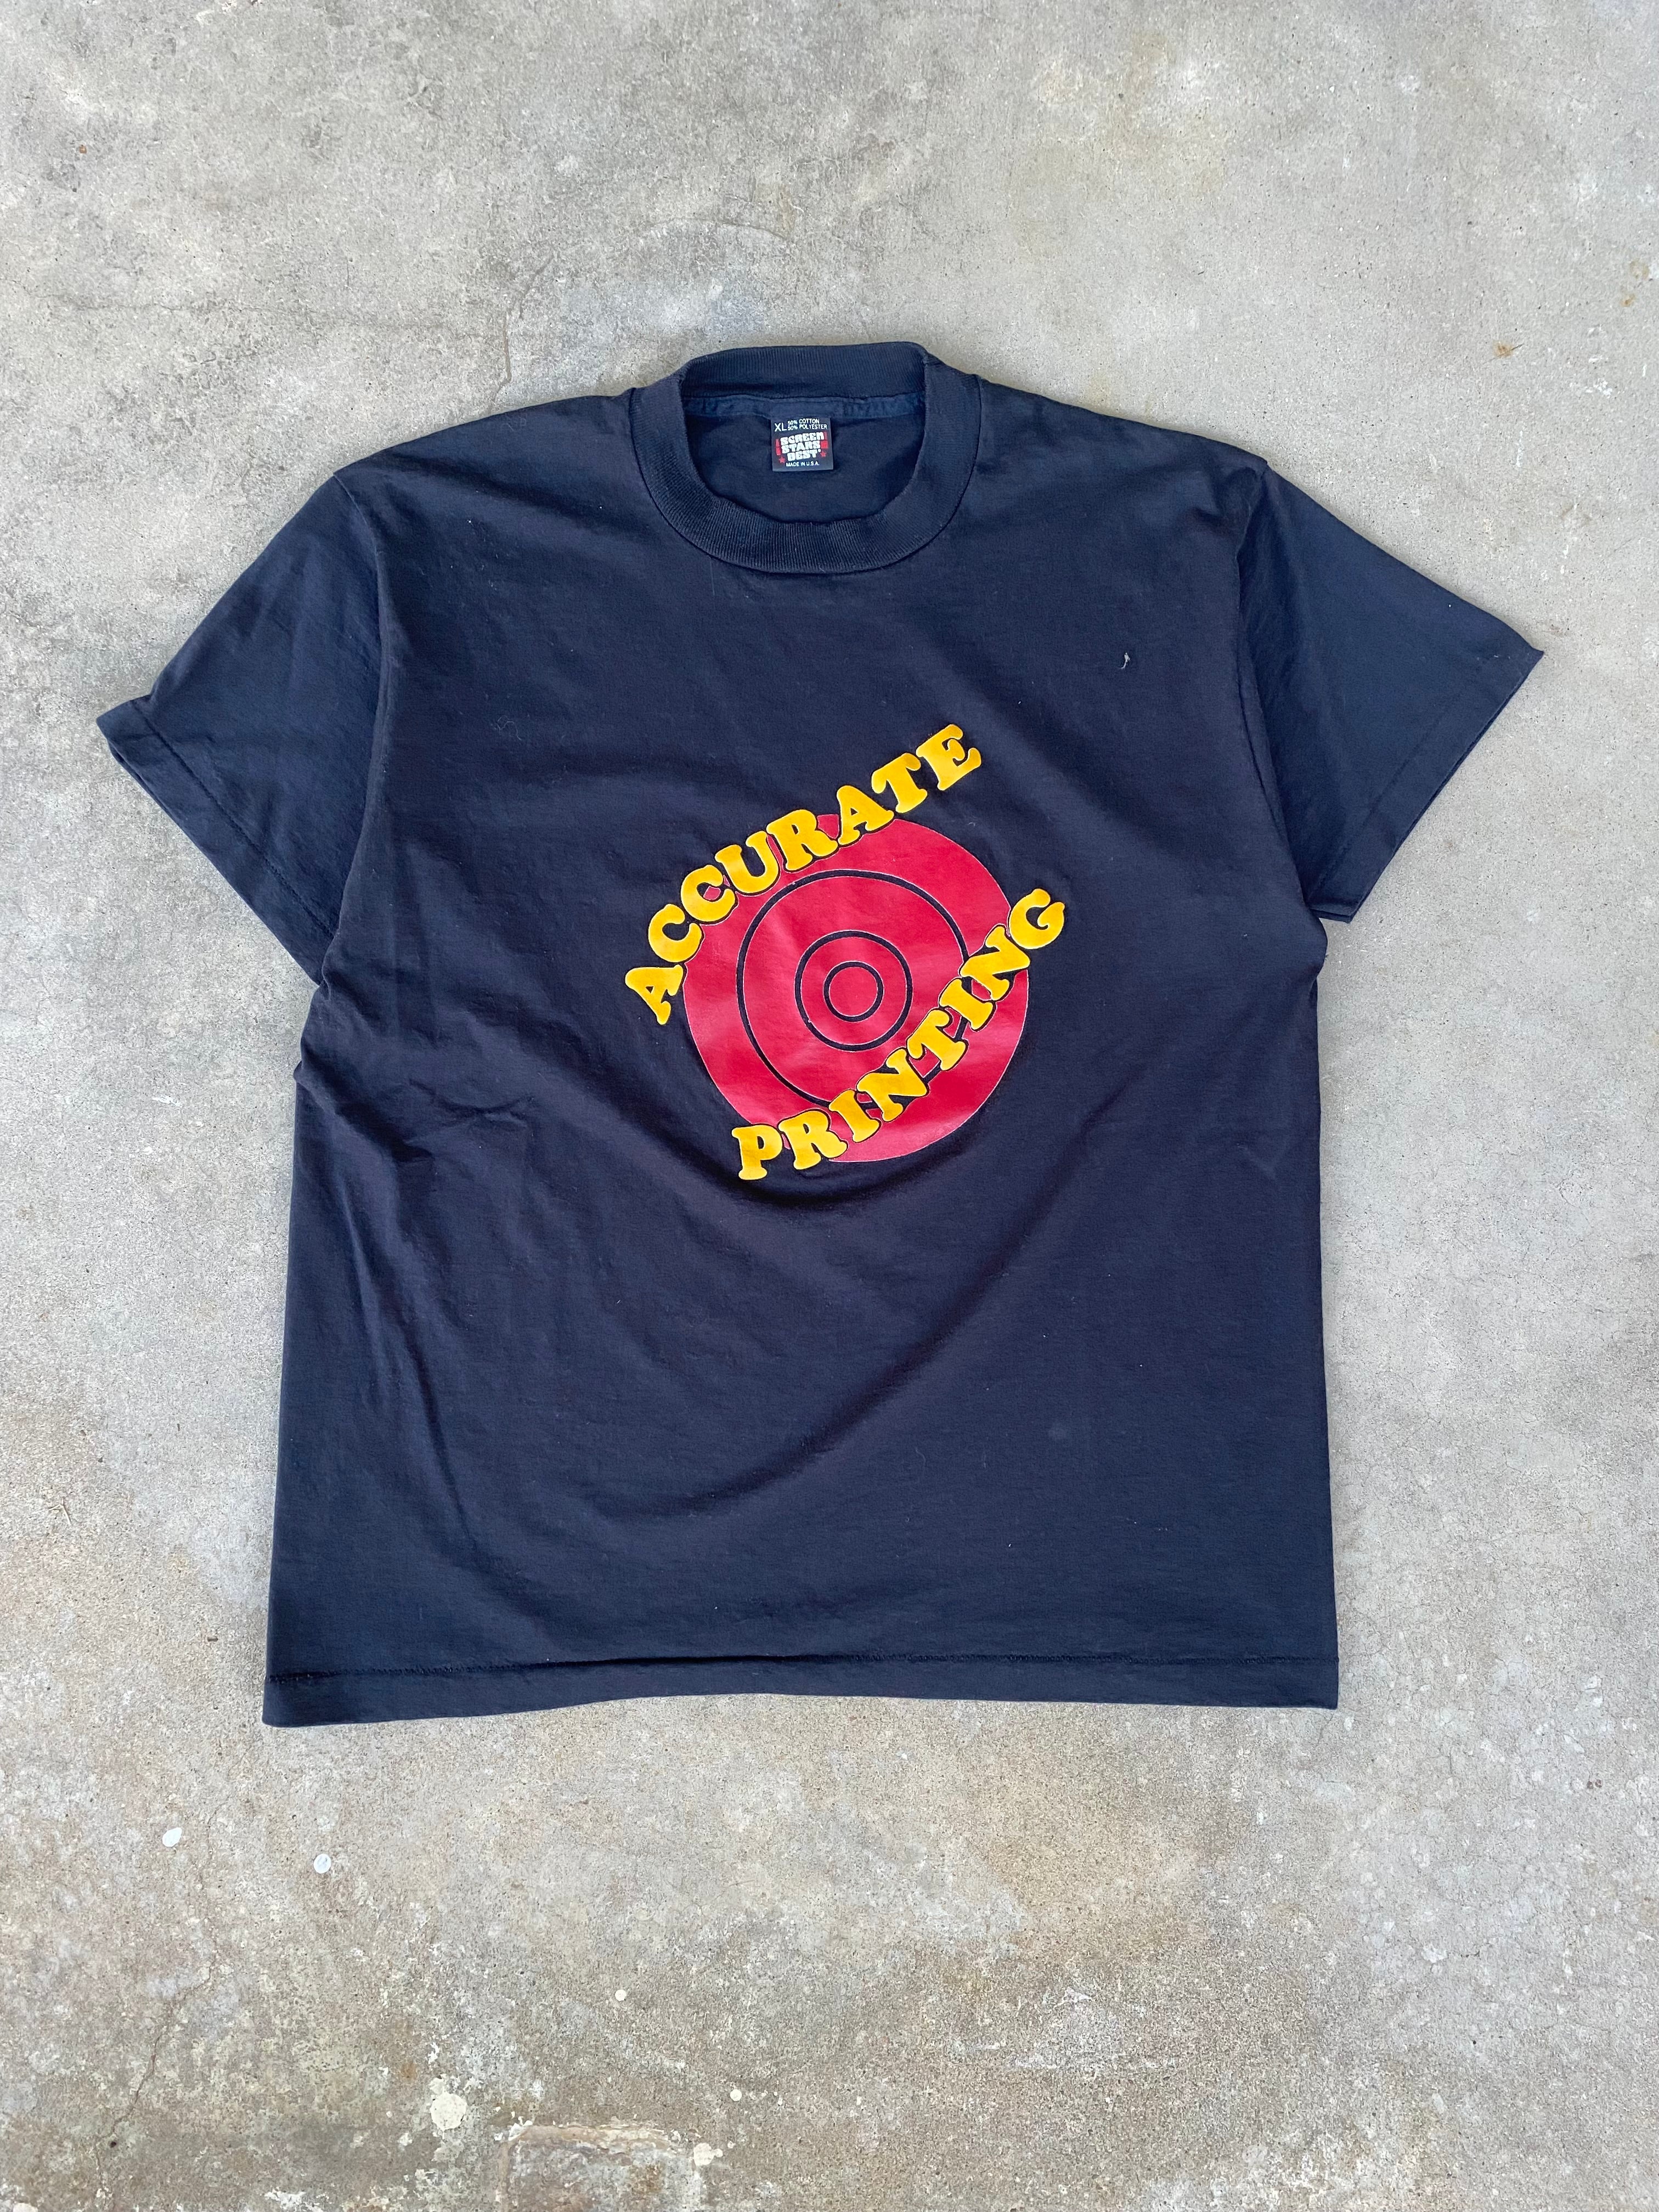 1990s Accurate Printing T-Shirt (L/XL)